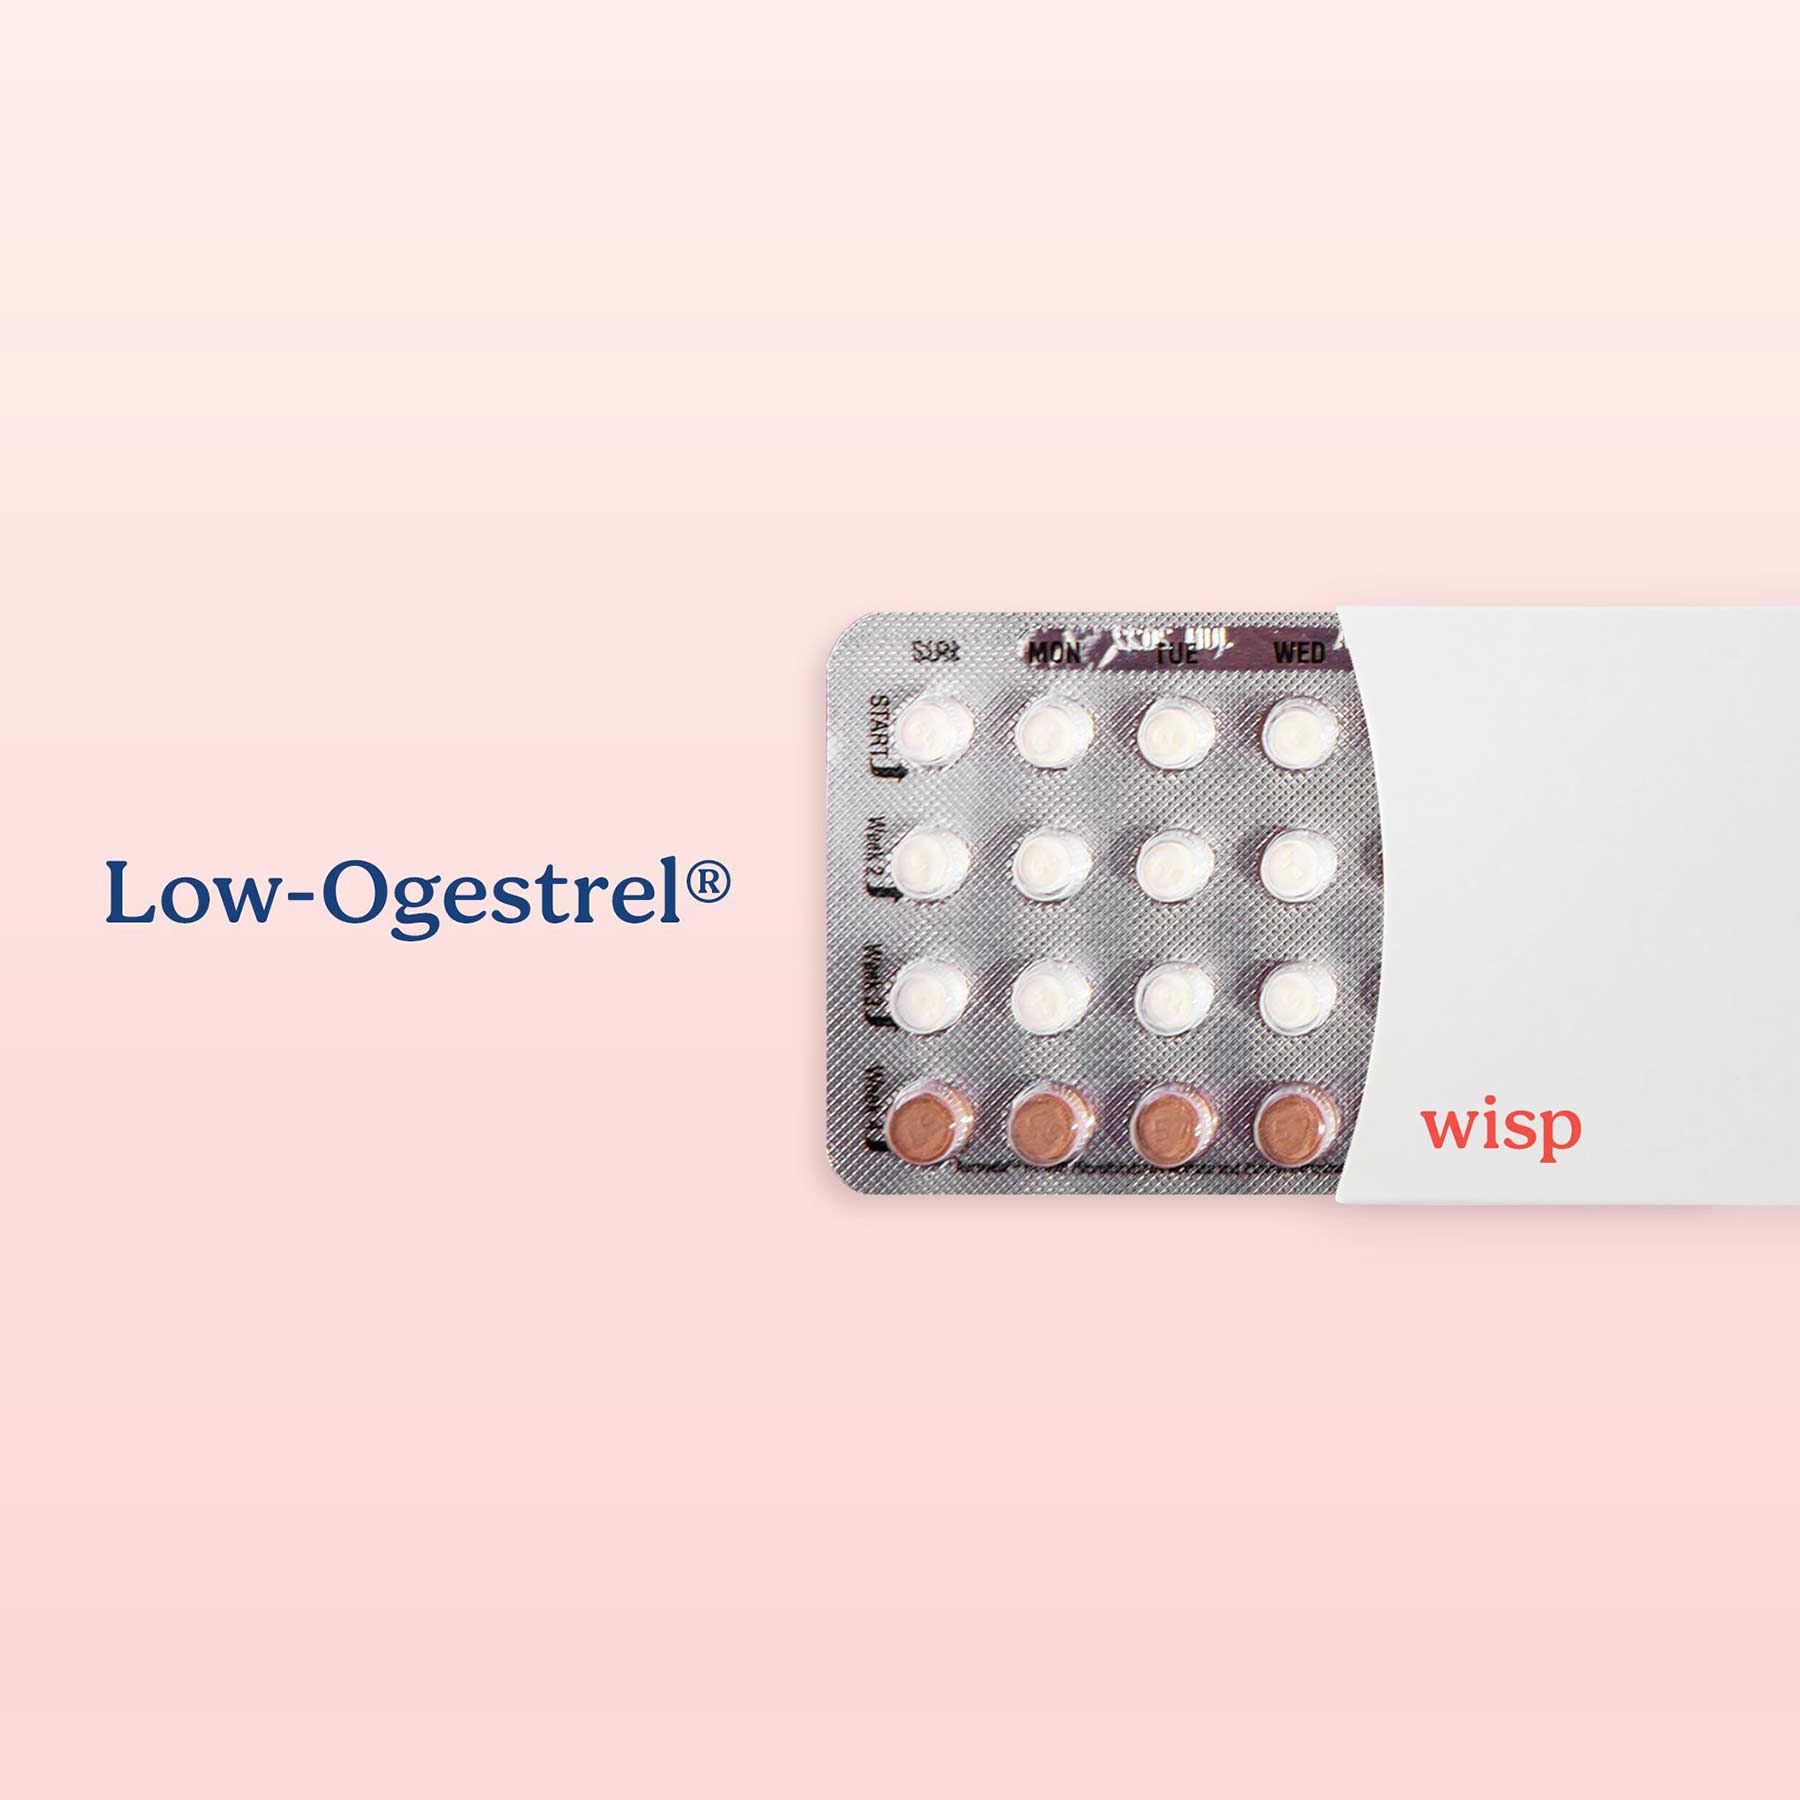 Packet of Low Ogestrel birth control pills on a pink background